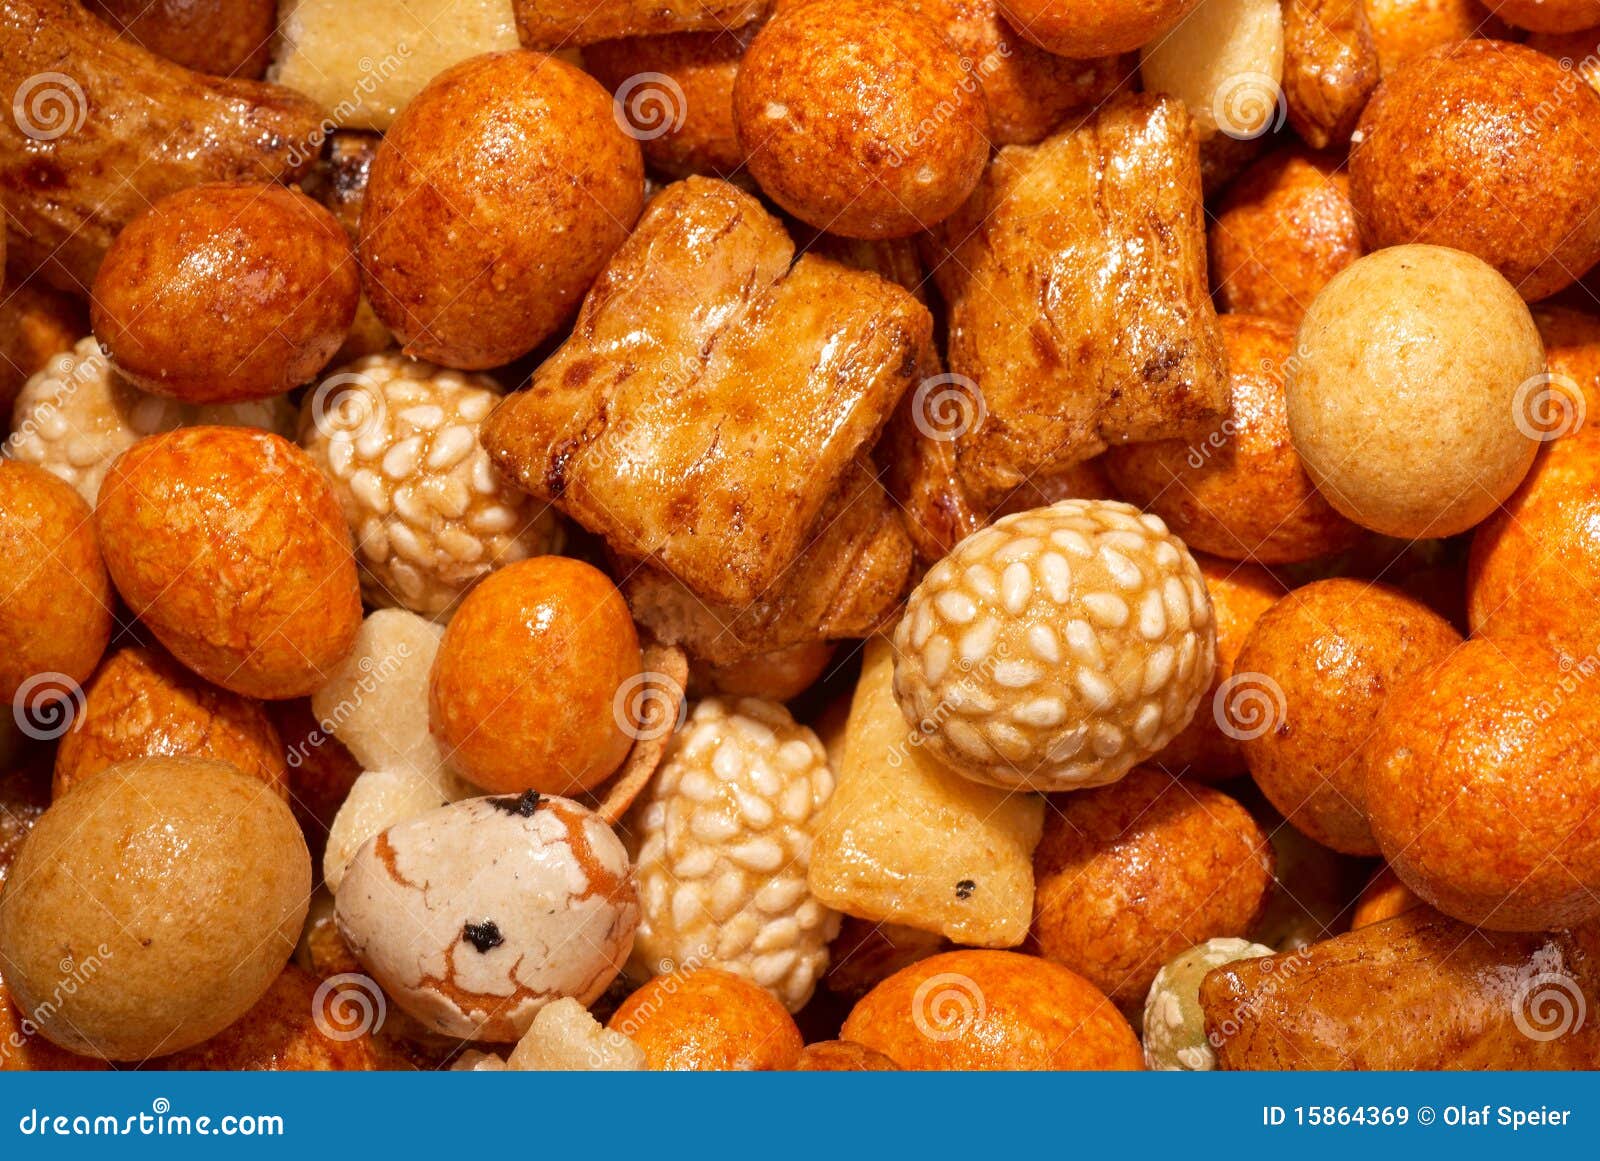 Japanese Rice Crackers Royalty Free Stock Images - Image: 15864369